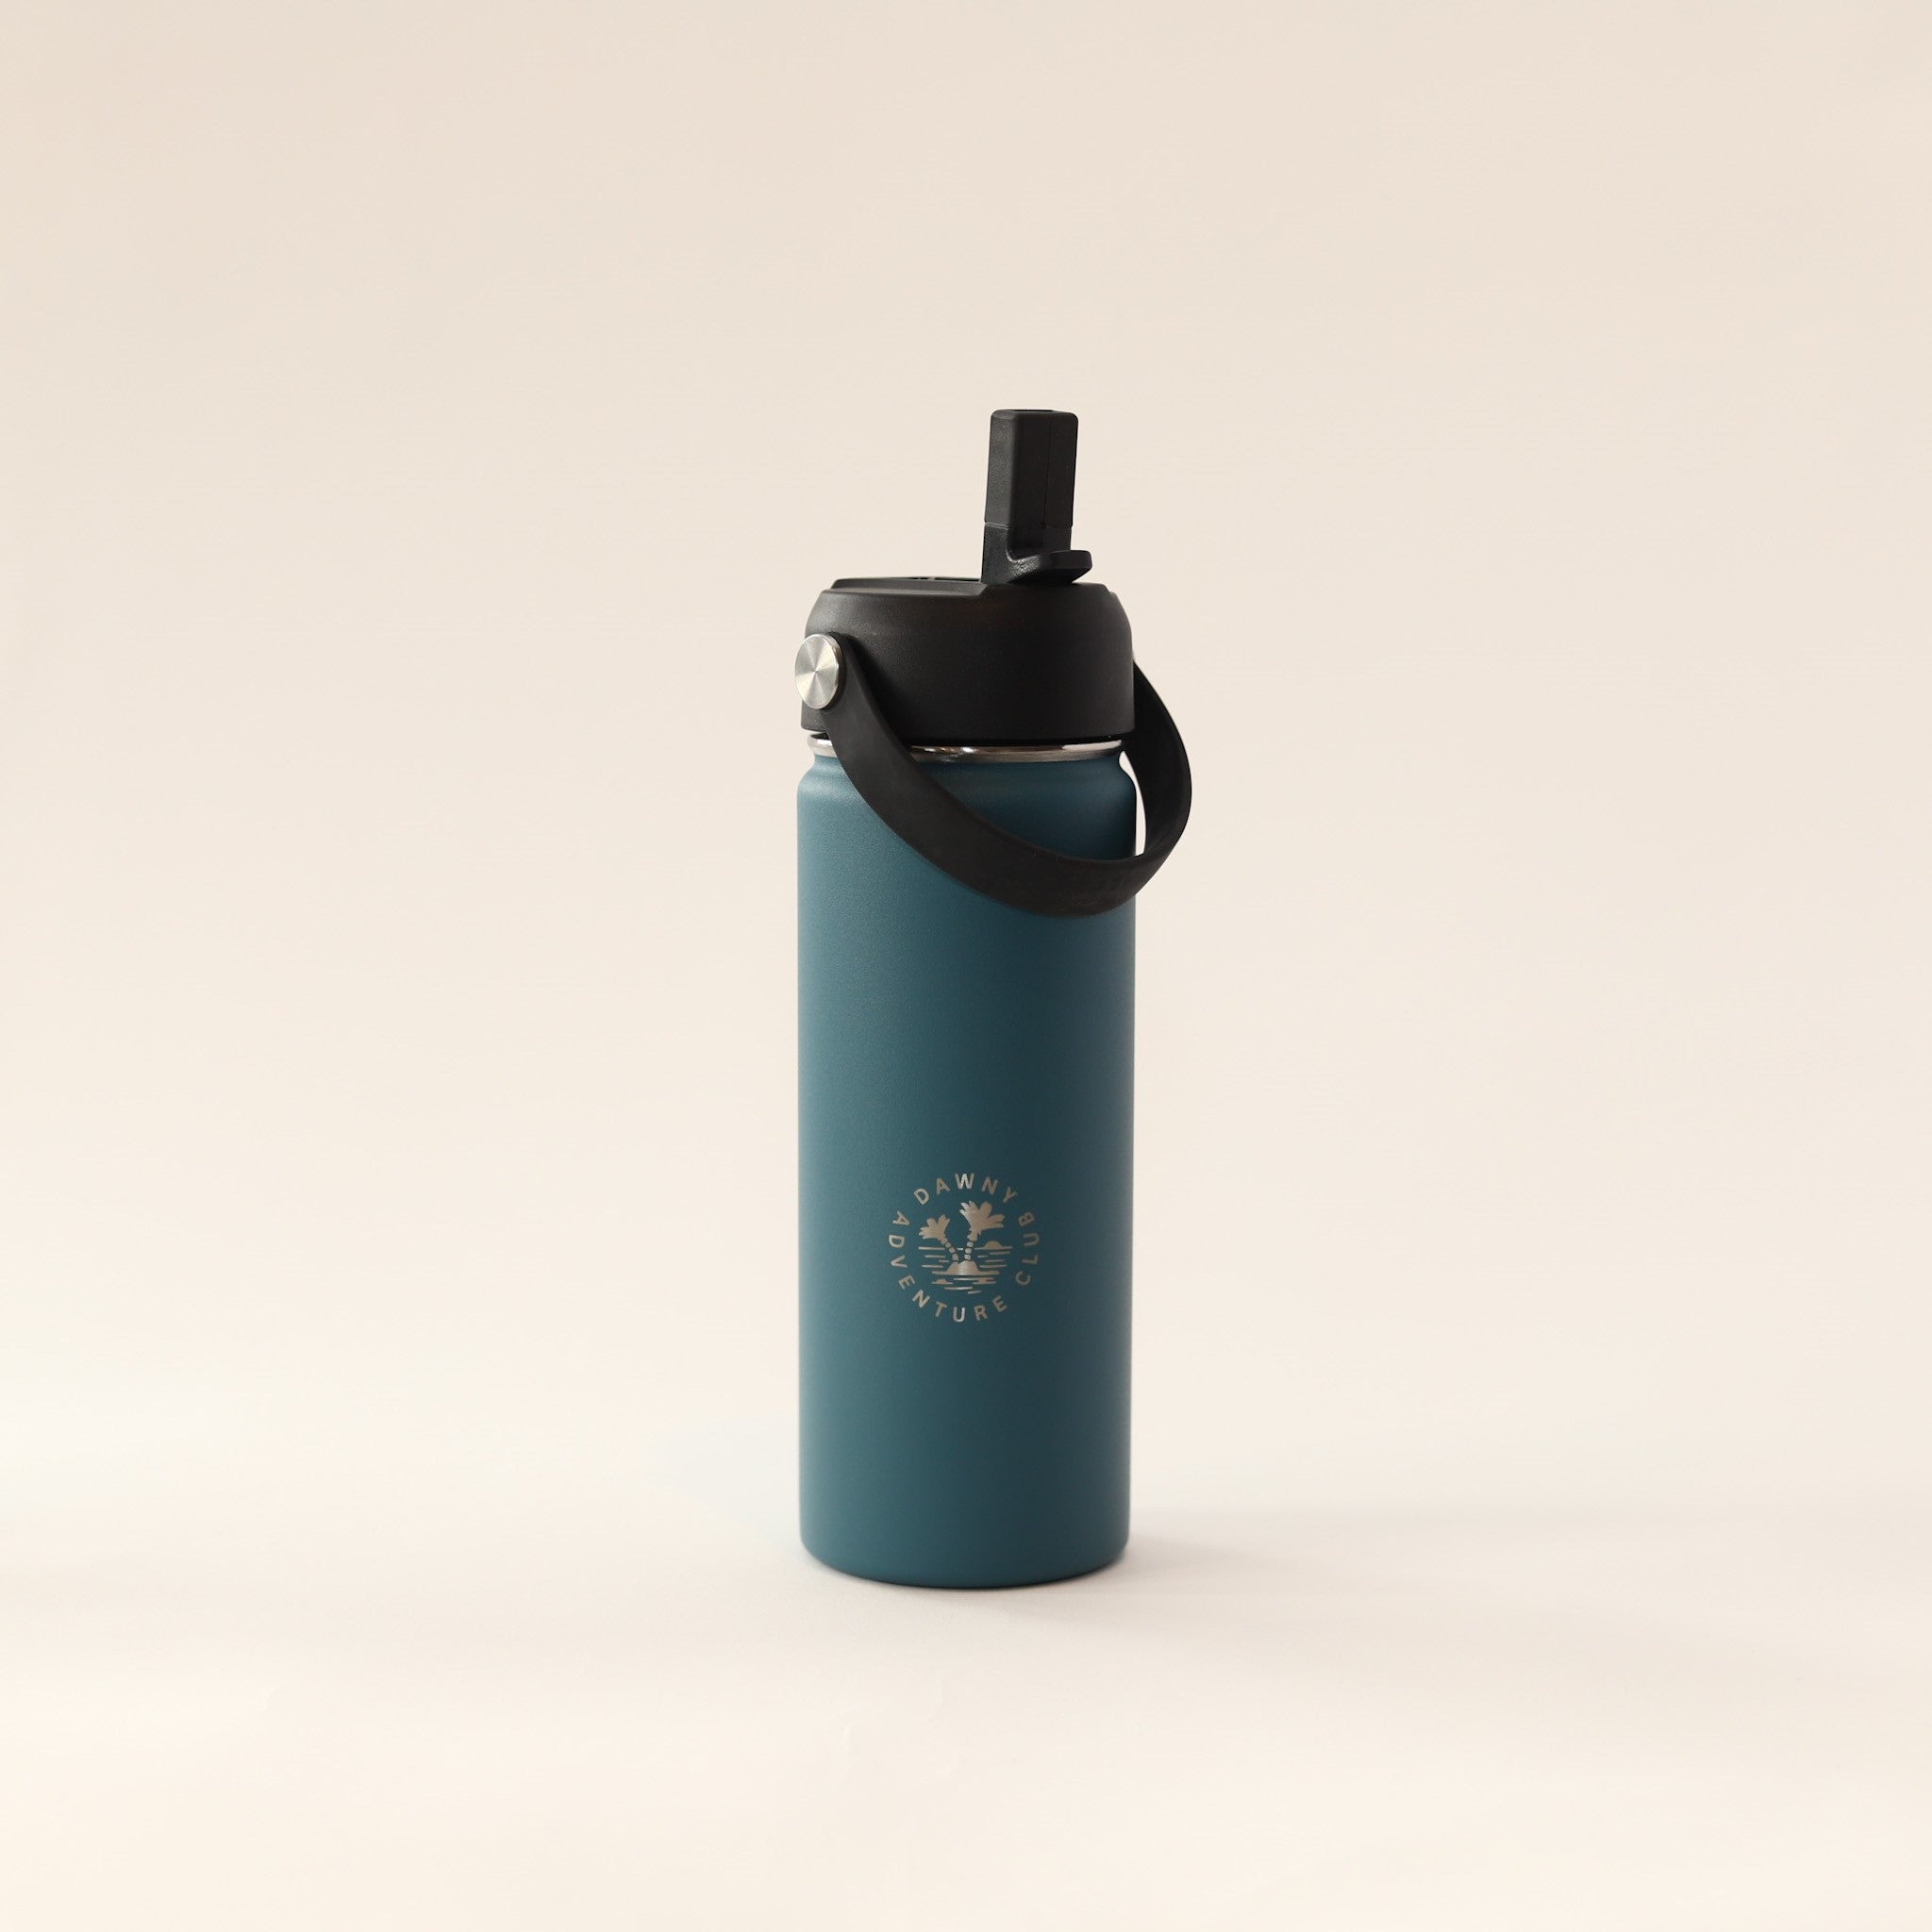 Dawny Insulated Cooler Bottle - 530ml